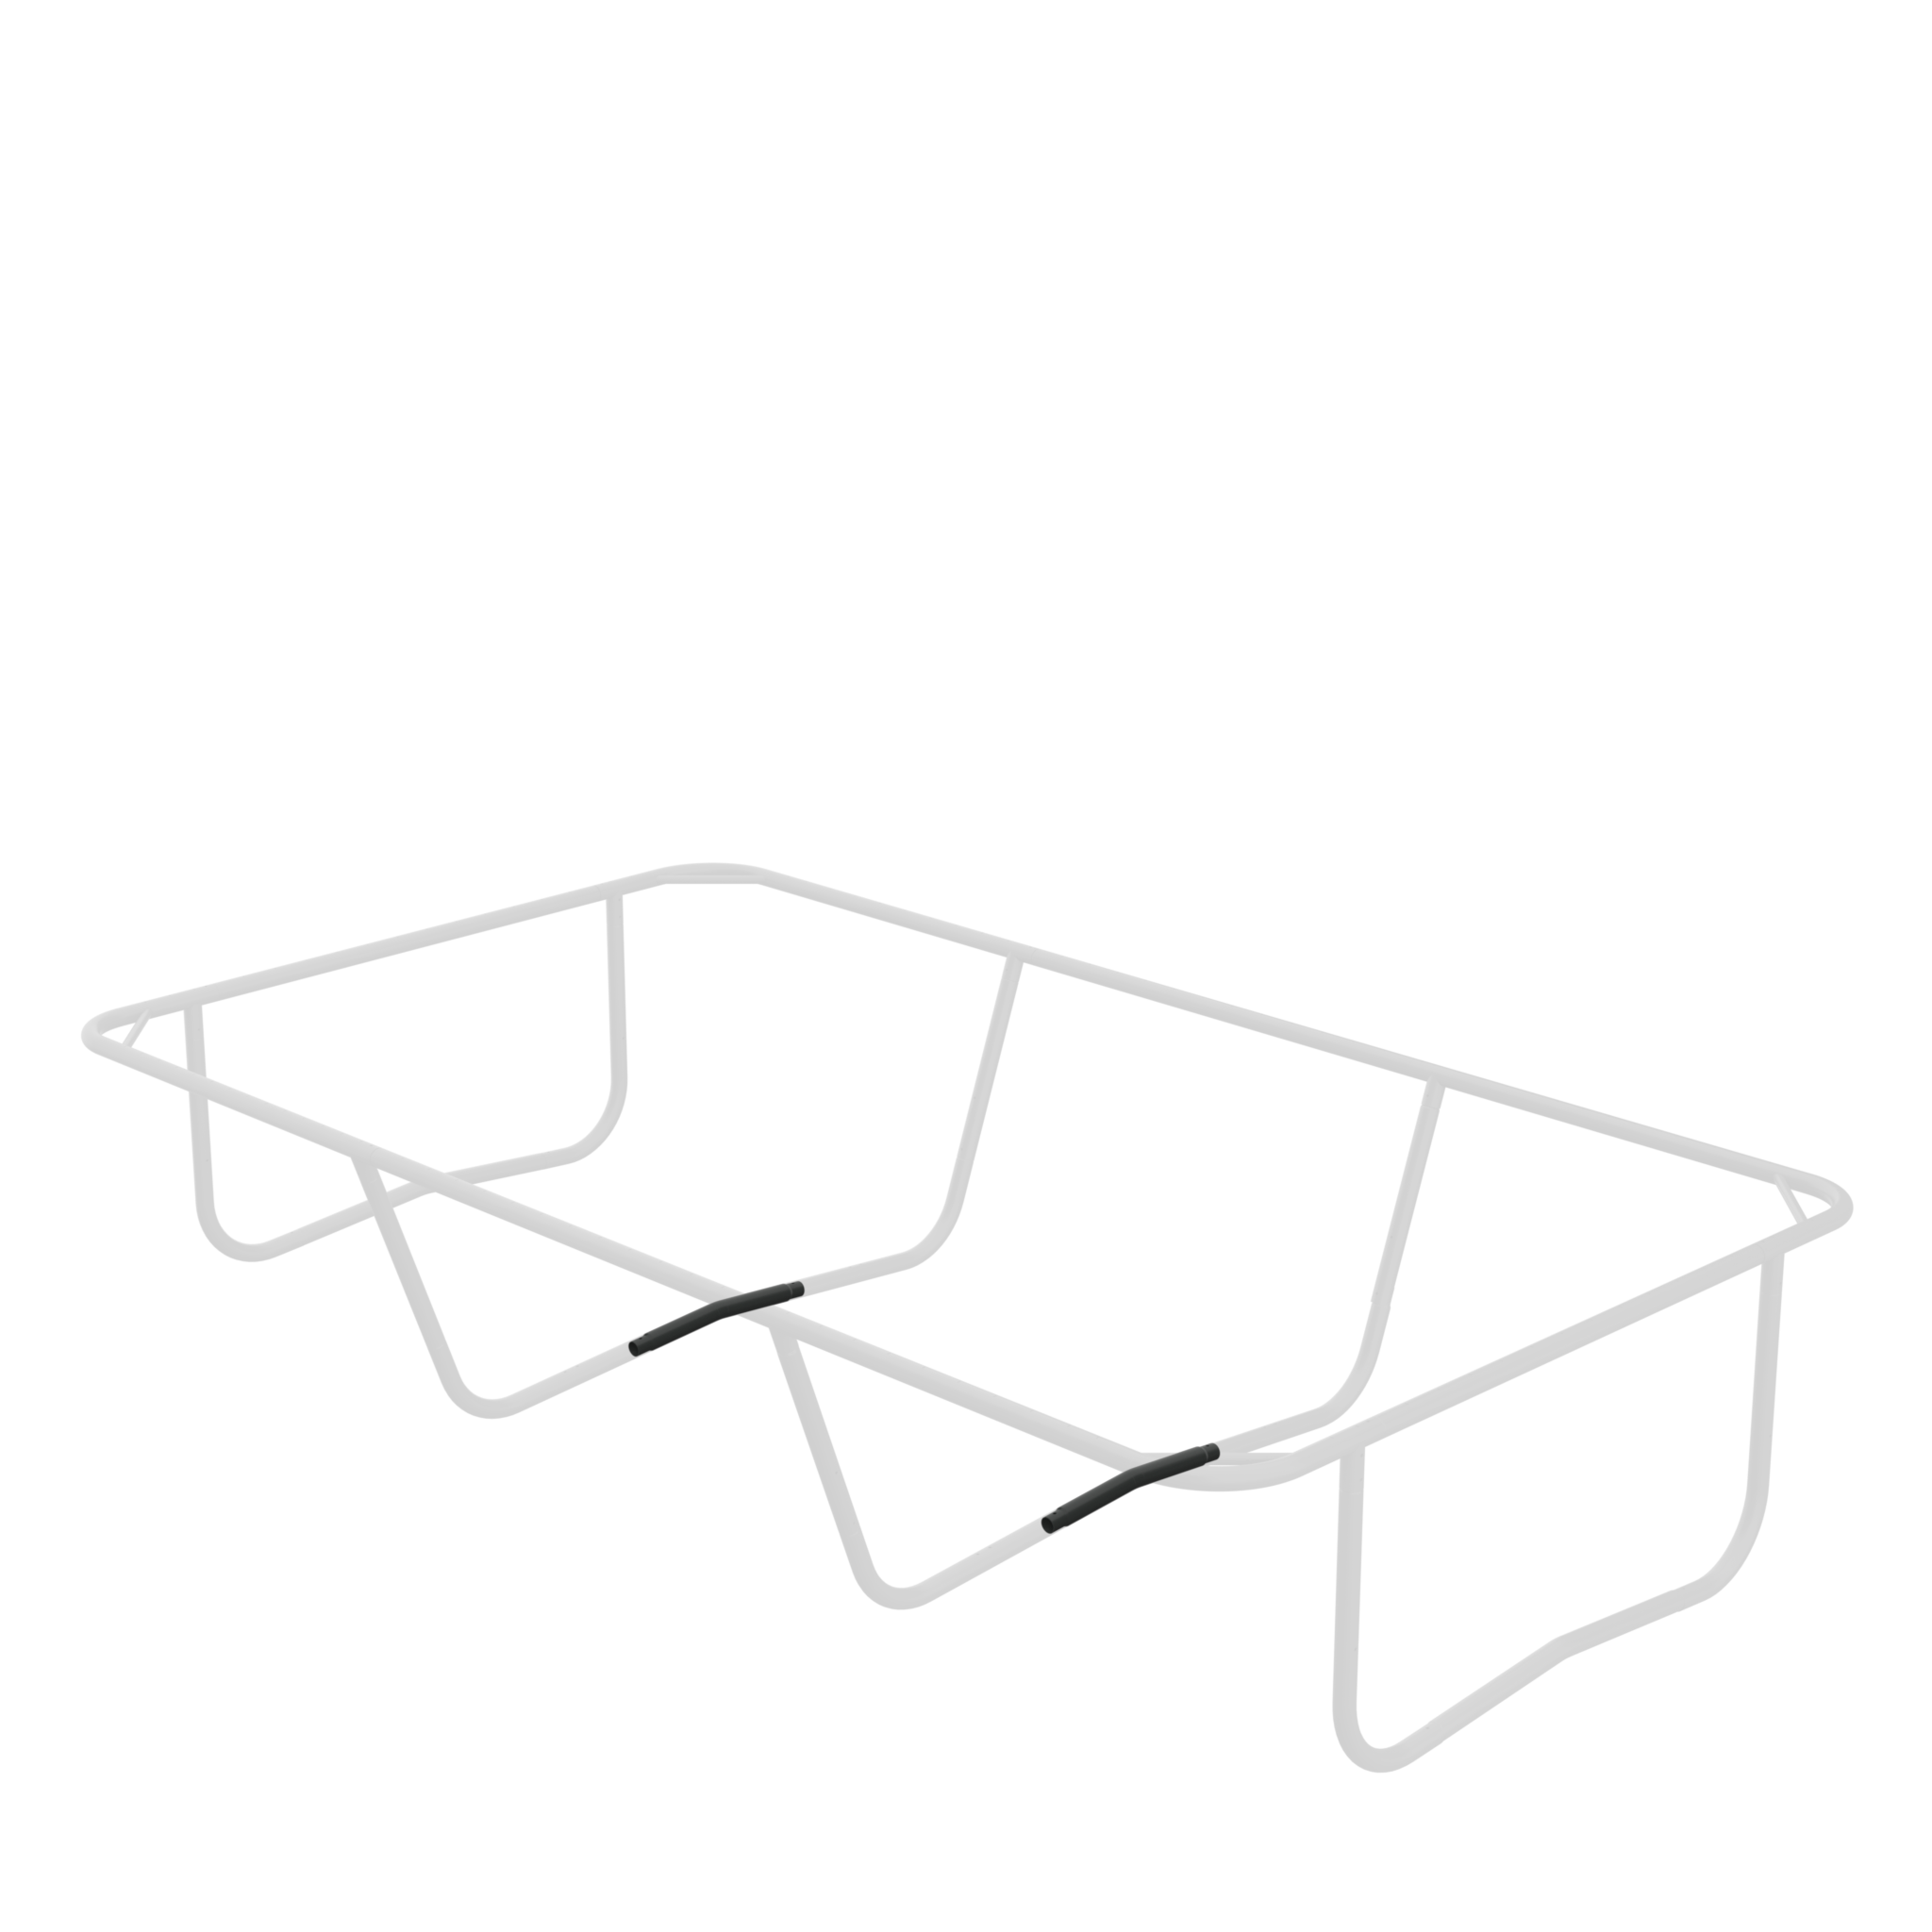 A Rectangular Trampoline with highlighted placements of the mid leg connecting tubes